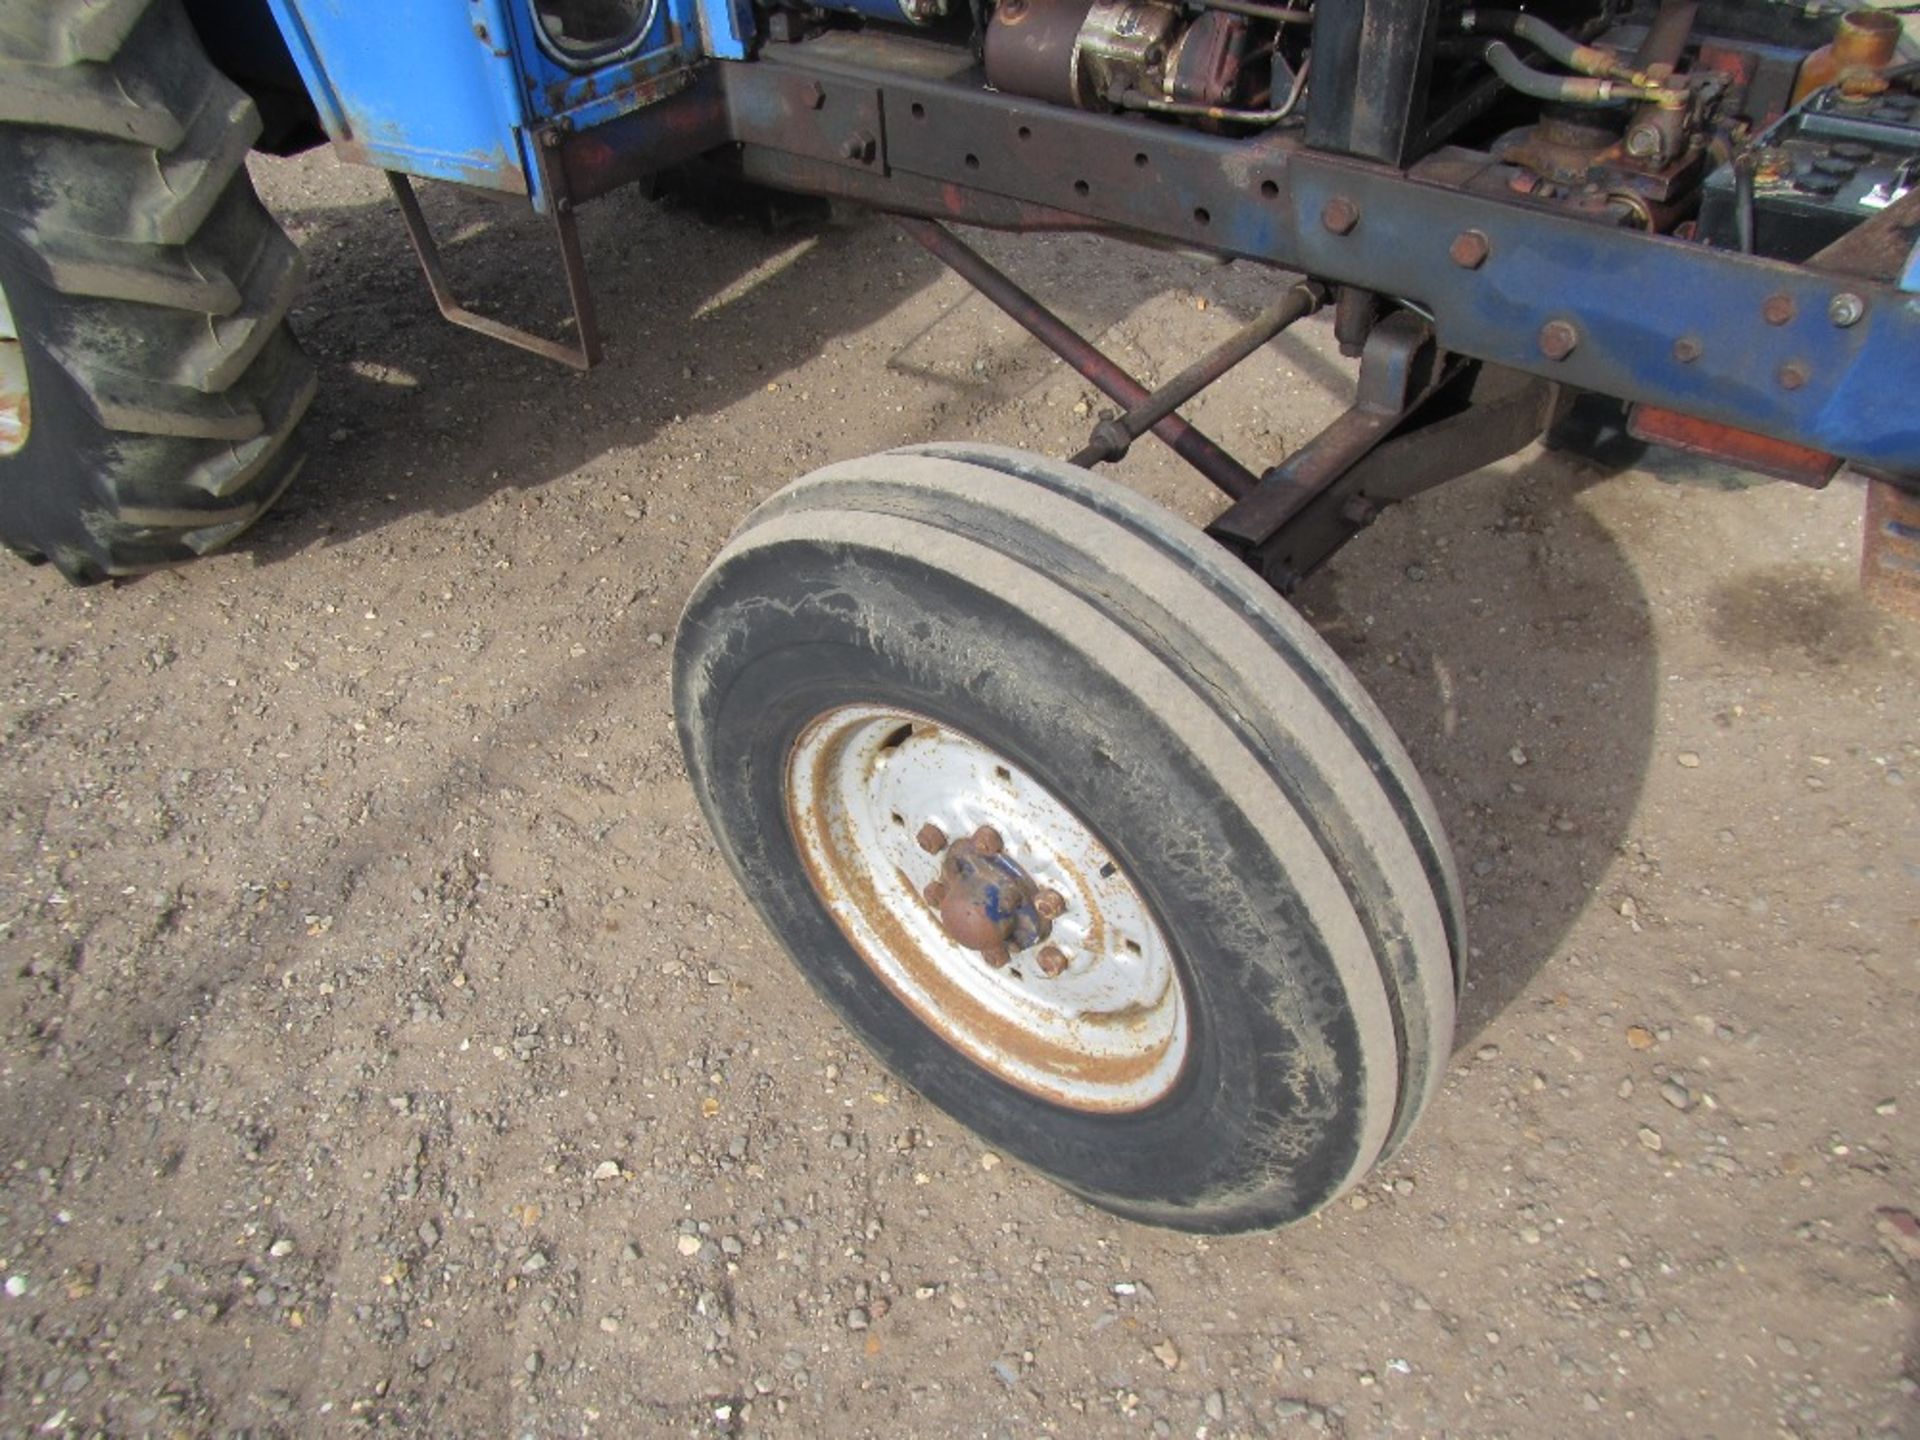 Leyland 384 2wd Tractor with Weights Reg No TJL 962K Ser No 301729 UNRESERVED LOT - Image 4 of 16